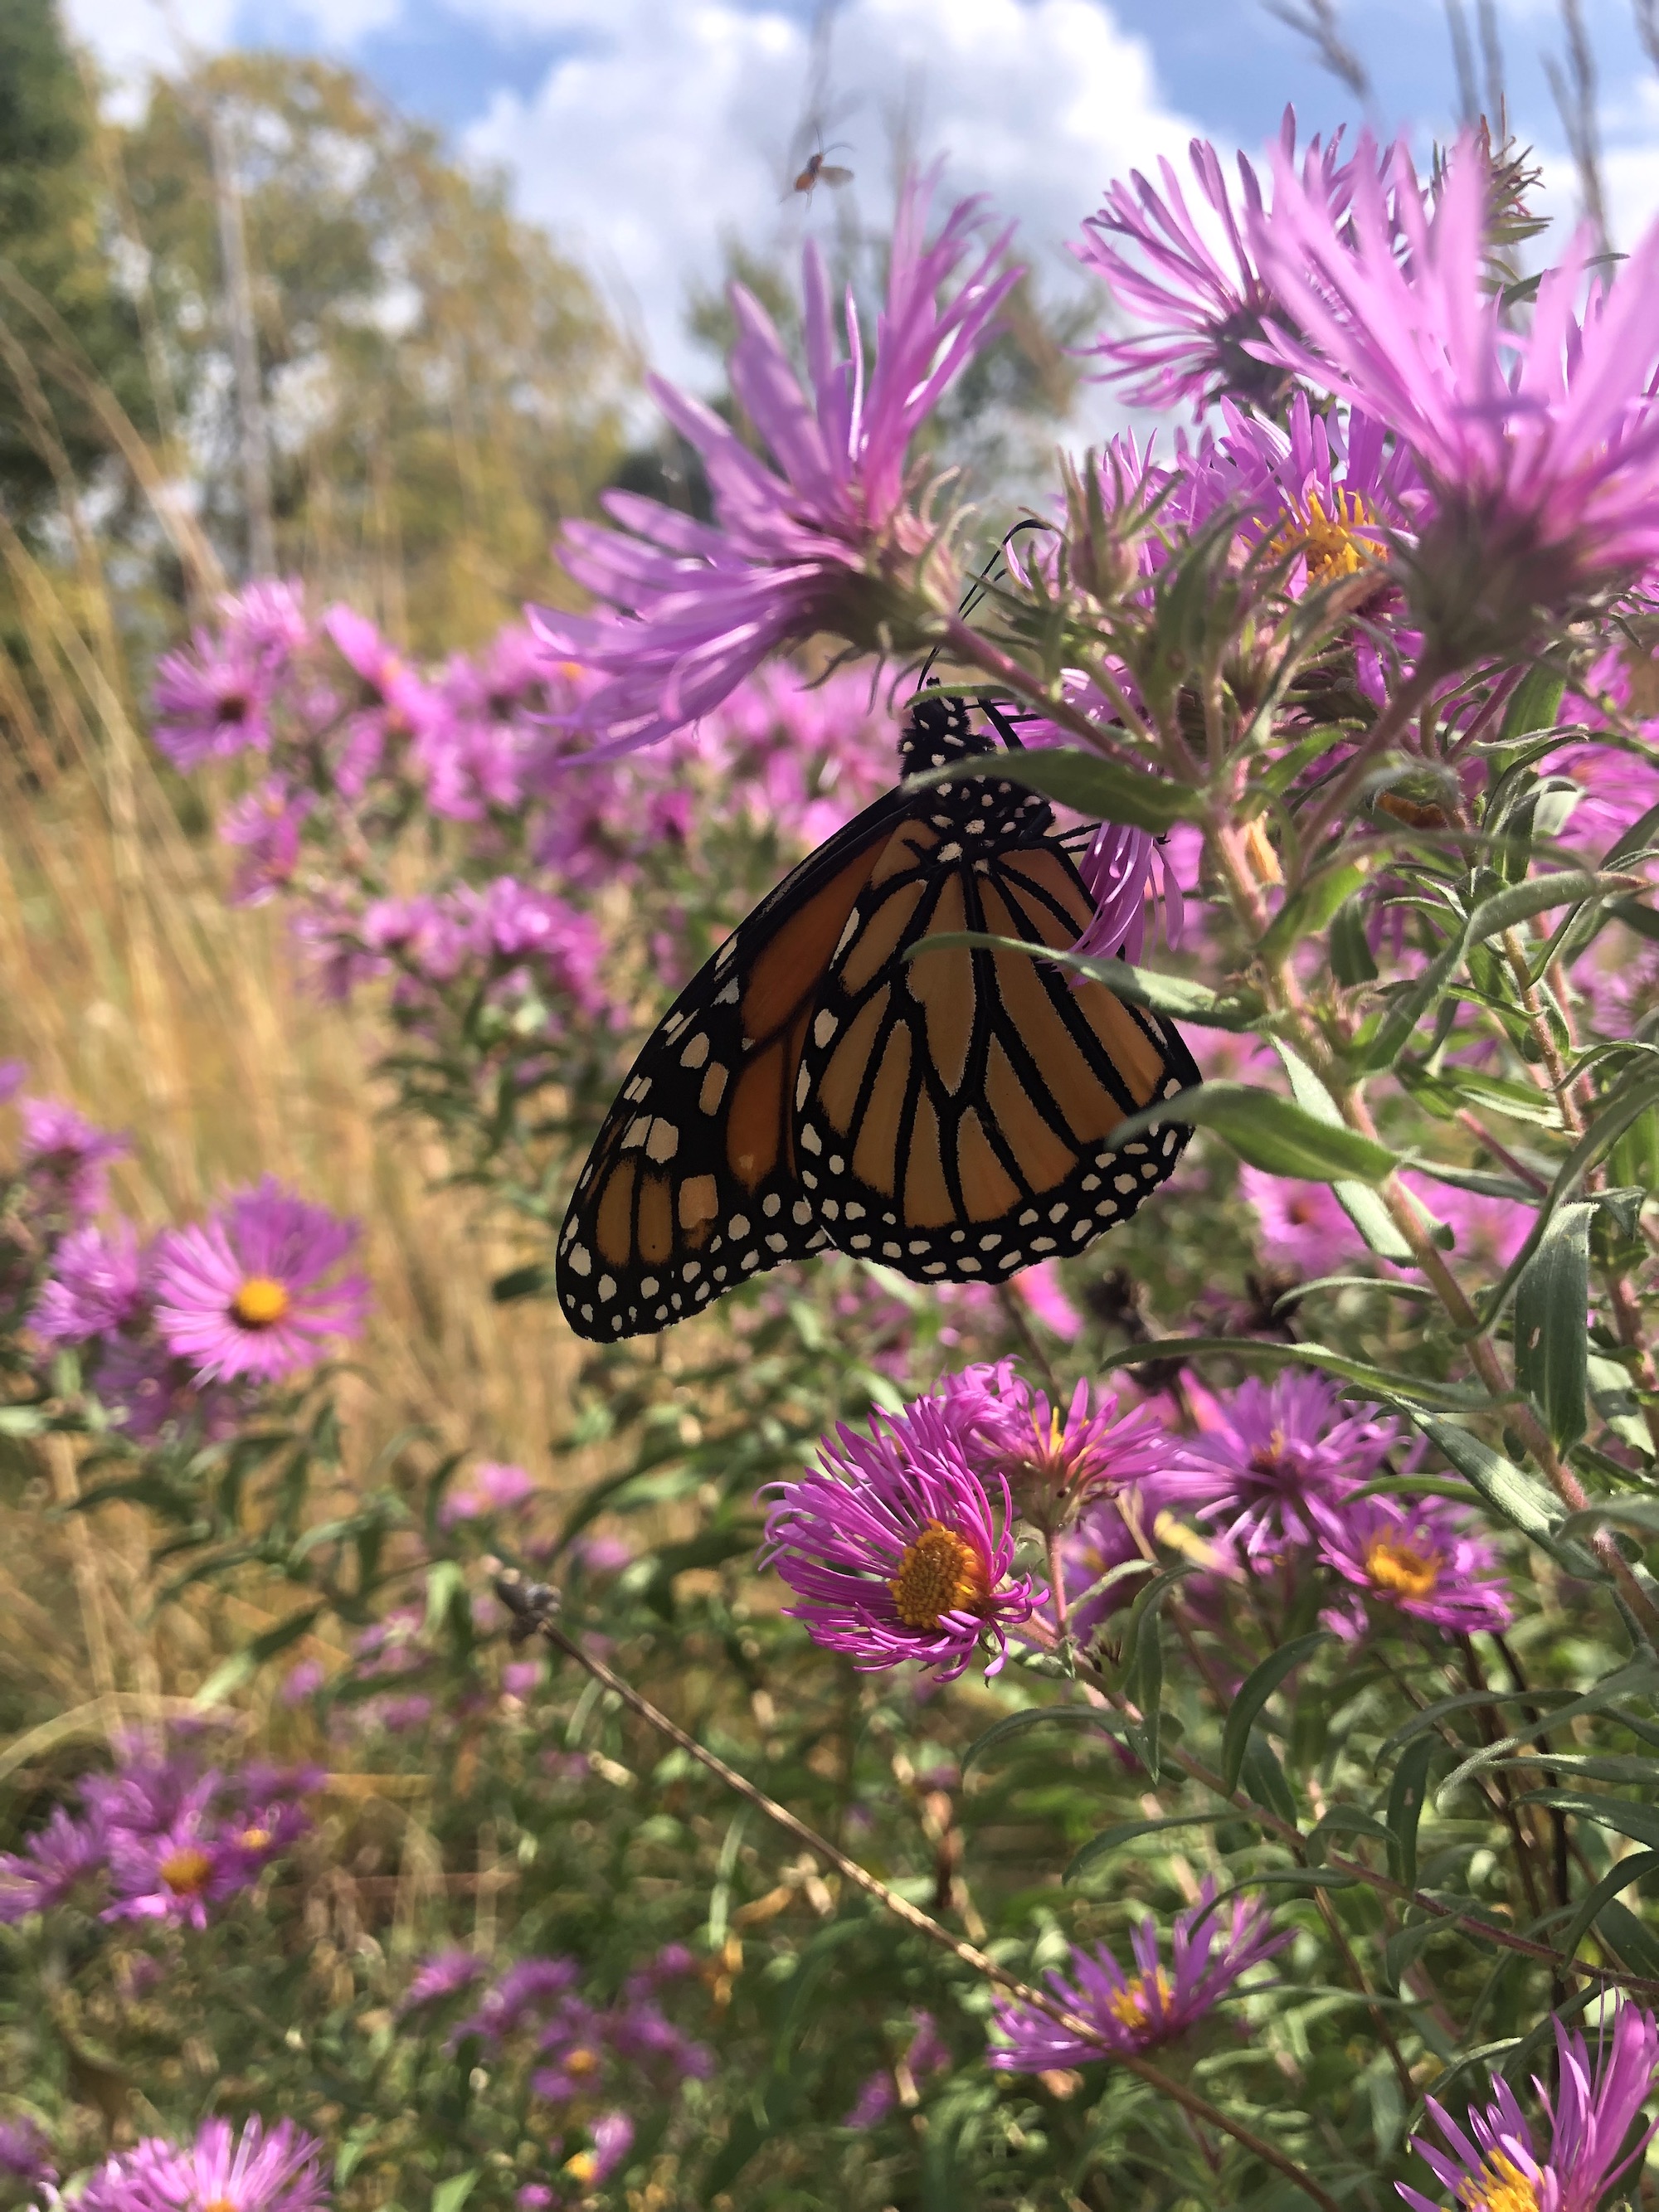 New England Aster along bike path at Odana Road intersection in Madison, Wisconsin on October 2, 2022.